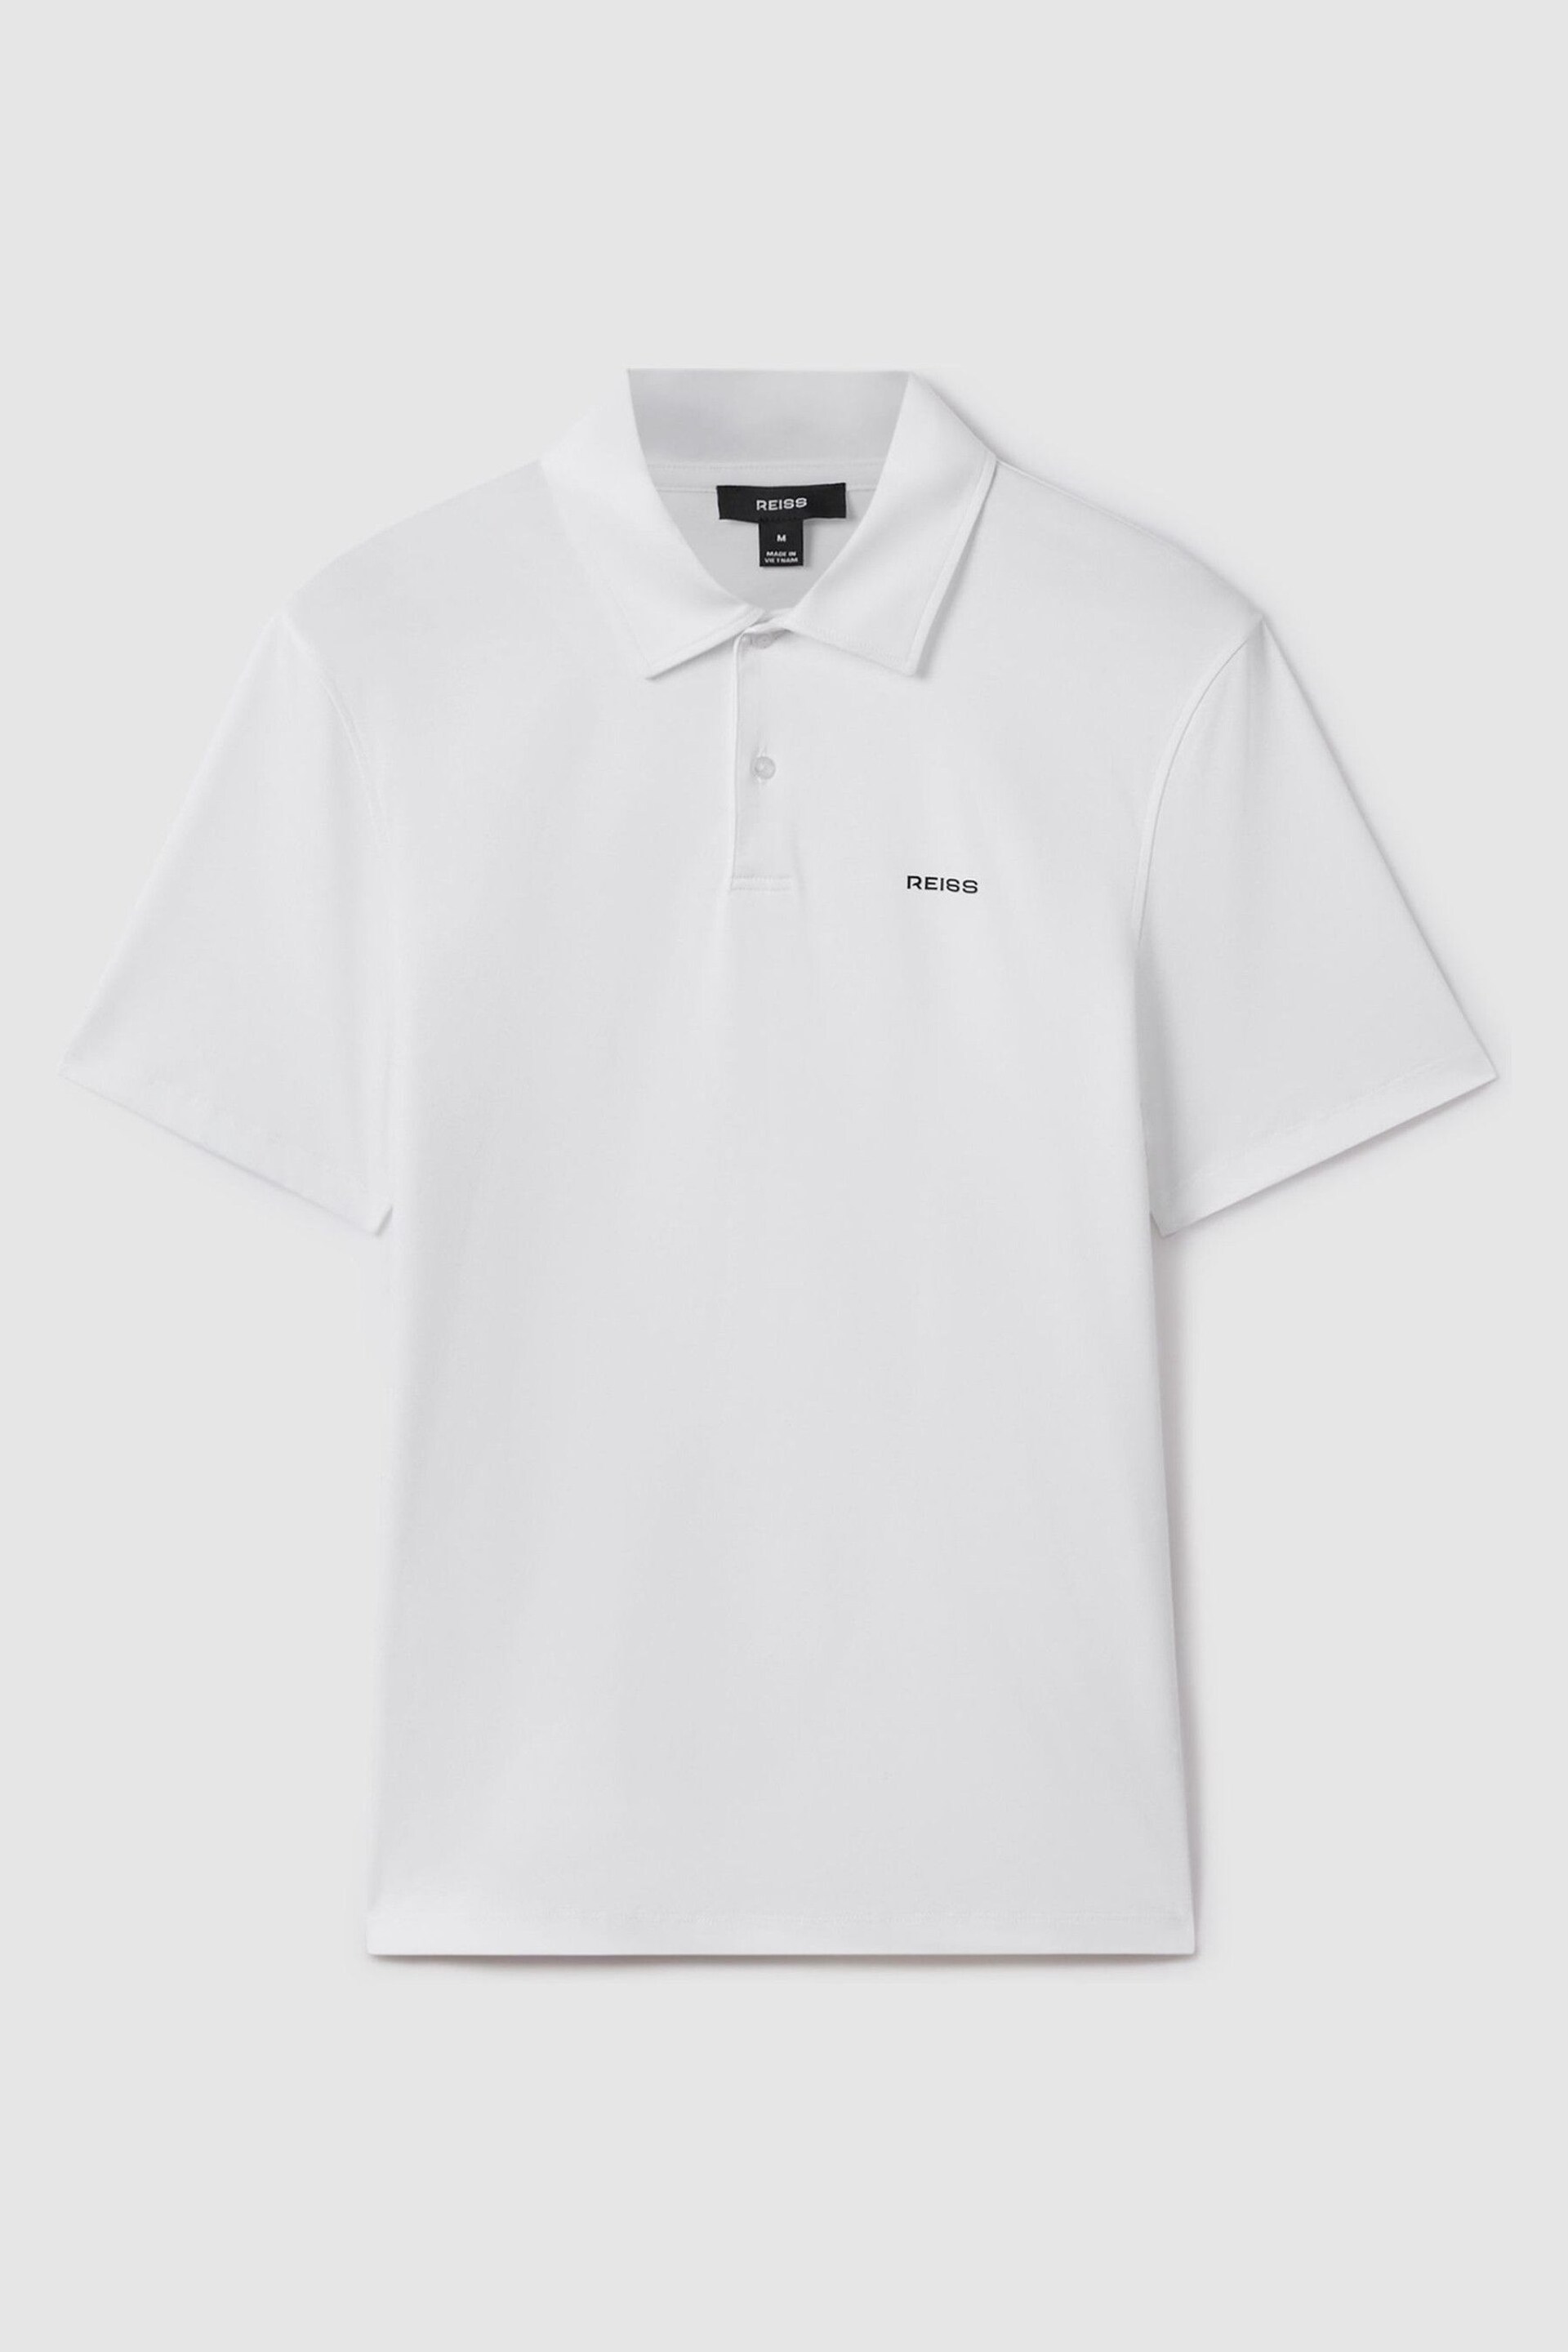 Reiss White Owens Slim Fit Cotton Polo Shirt - Image 2 of 6